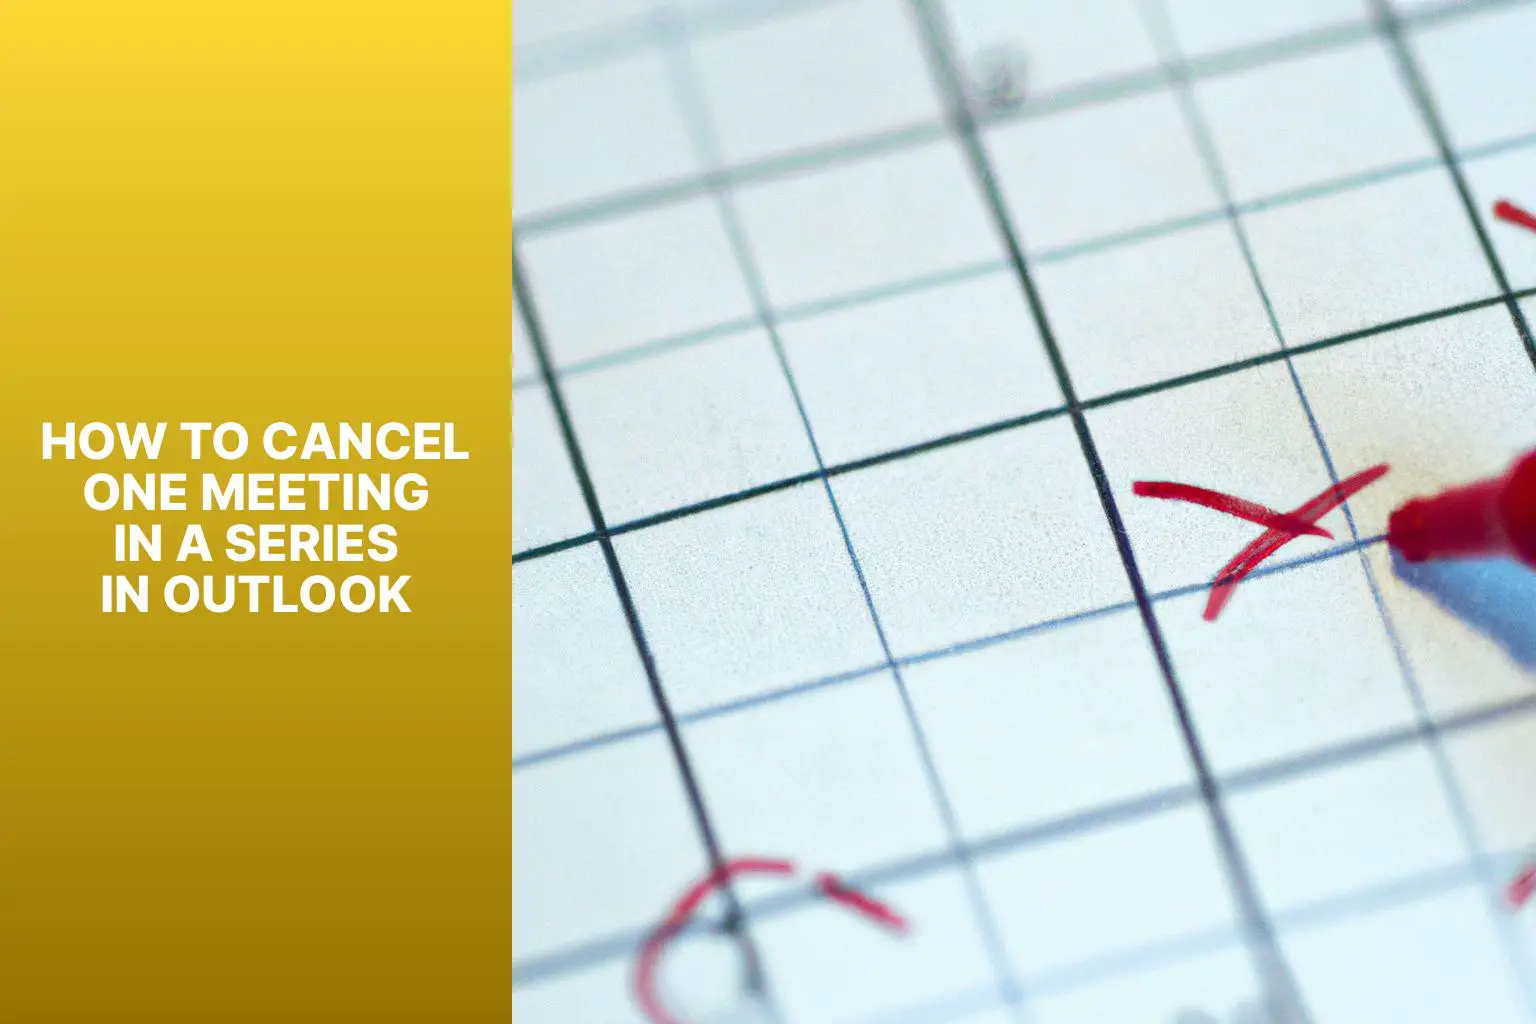 Cancel a Meeting in a Series in Outlook how to cancel one meeting in a series in